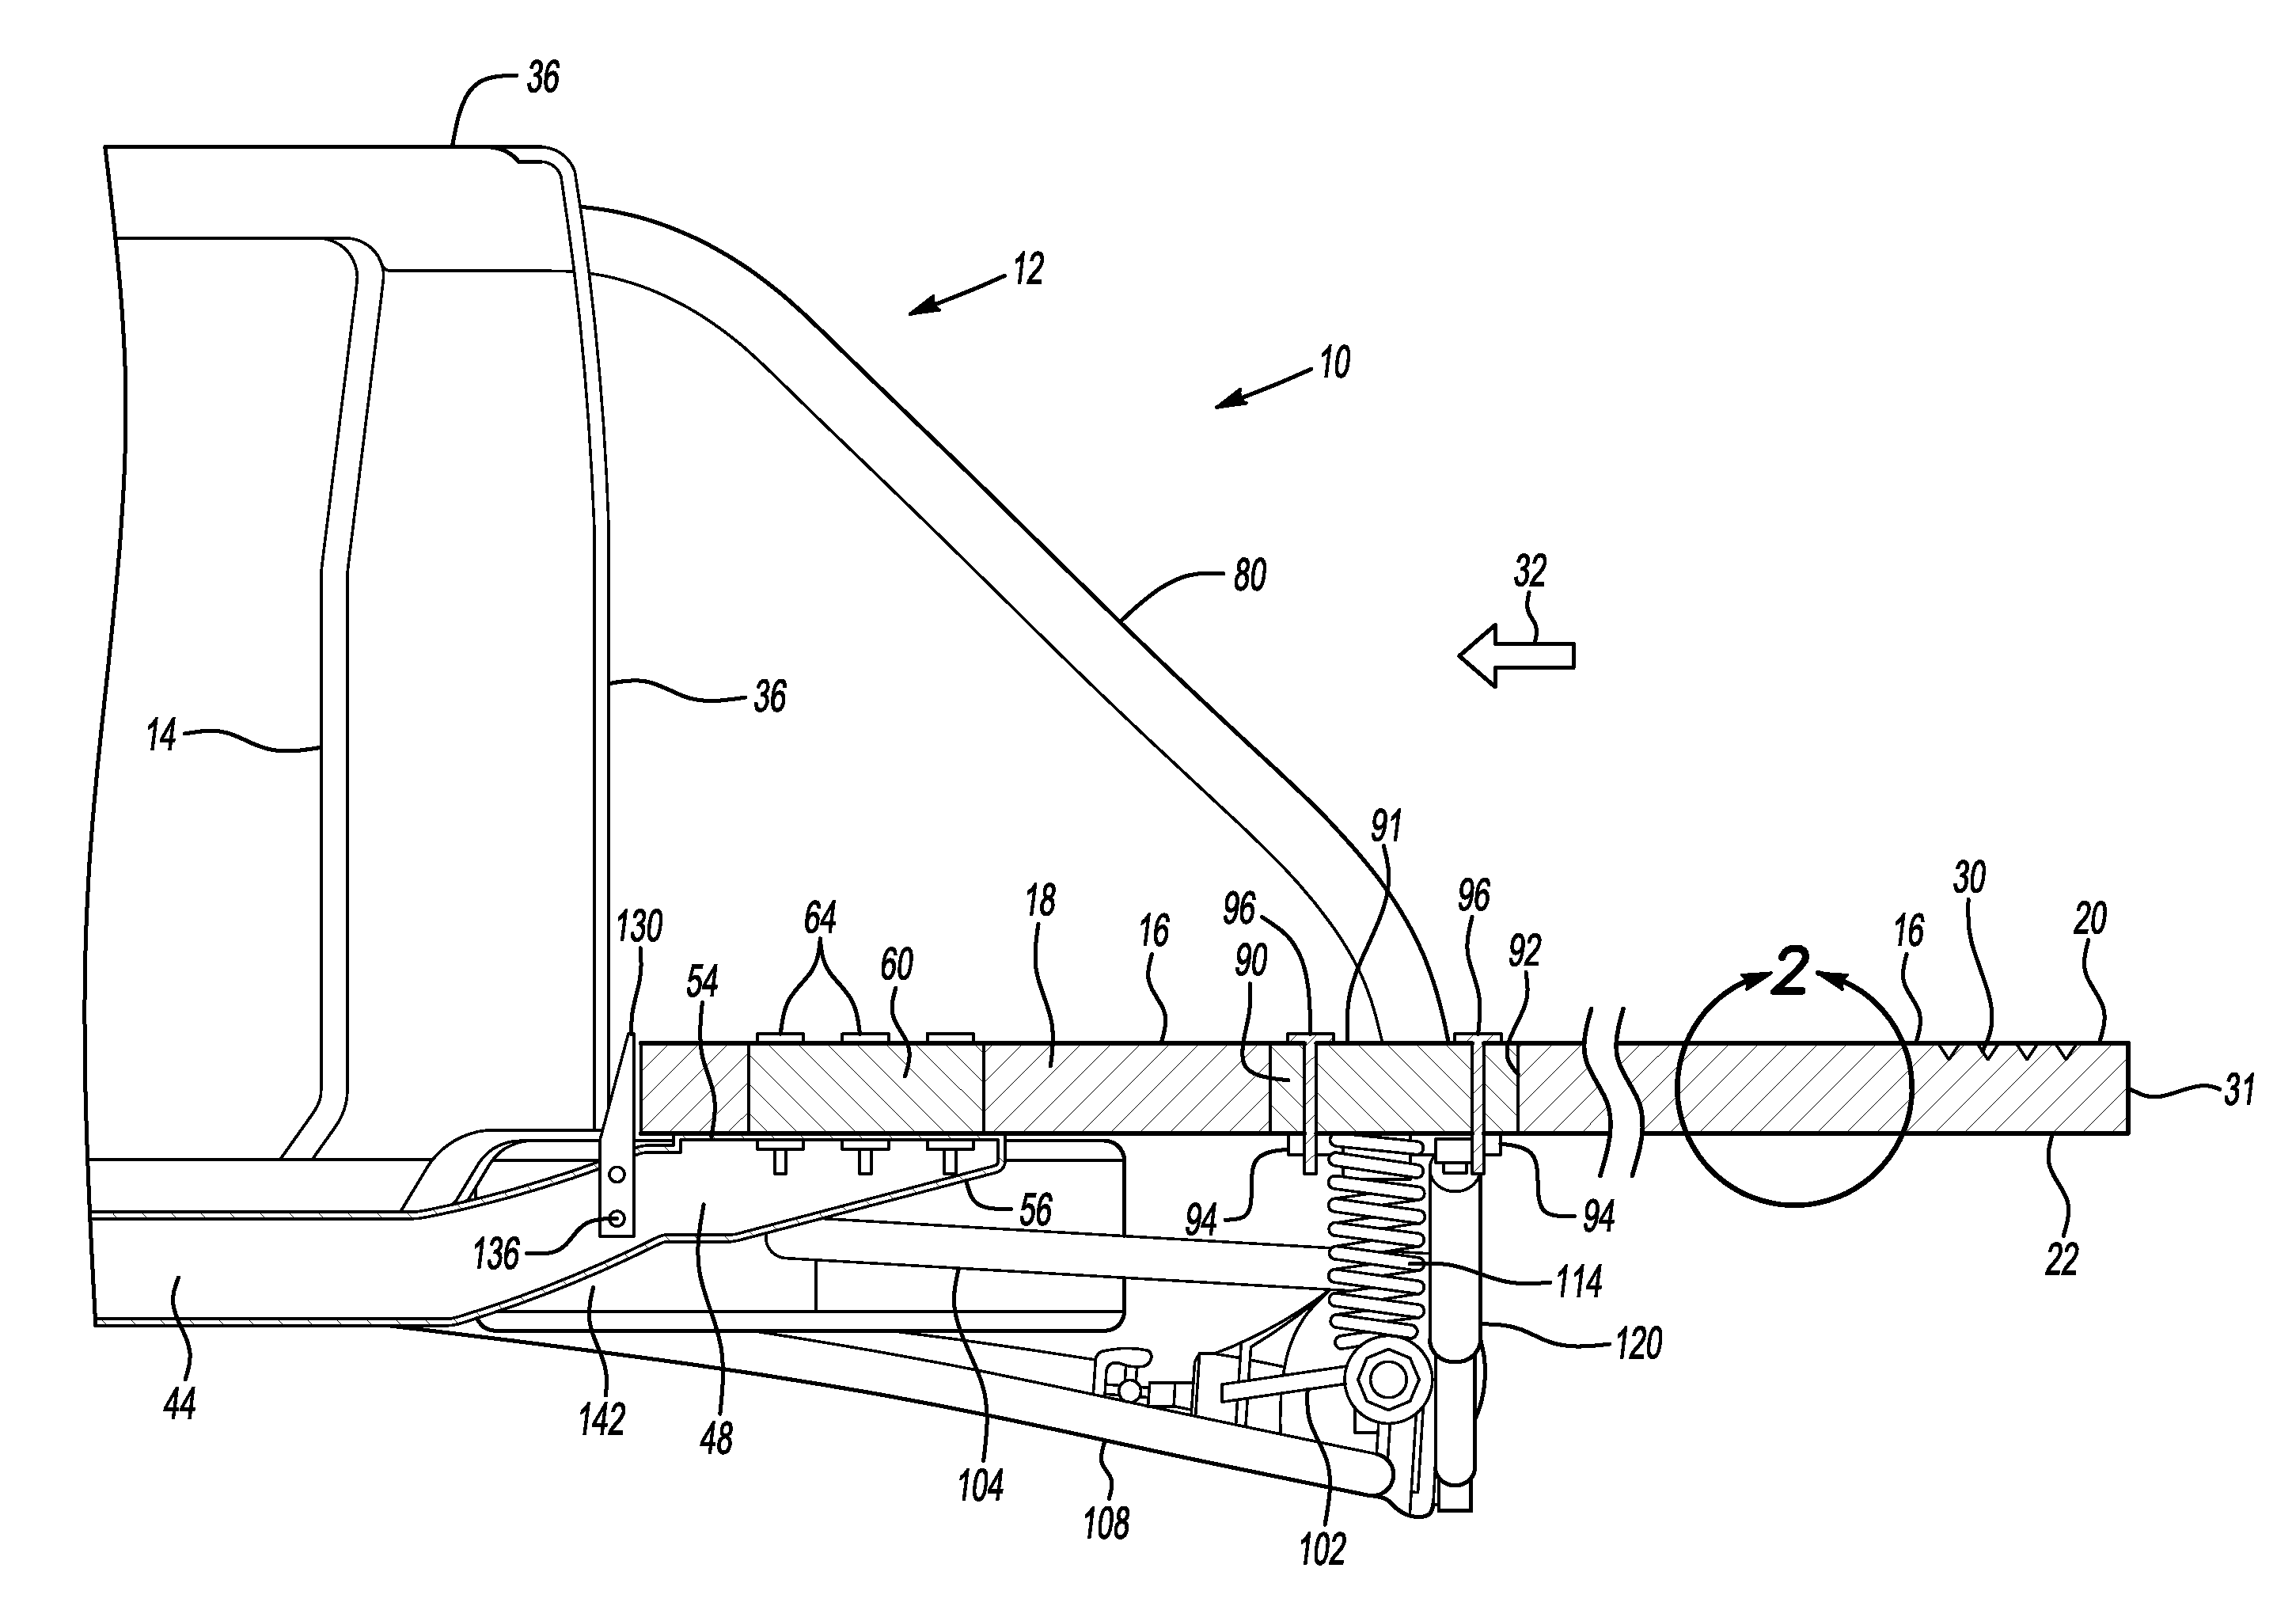 Vehicle with composite structural bed